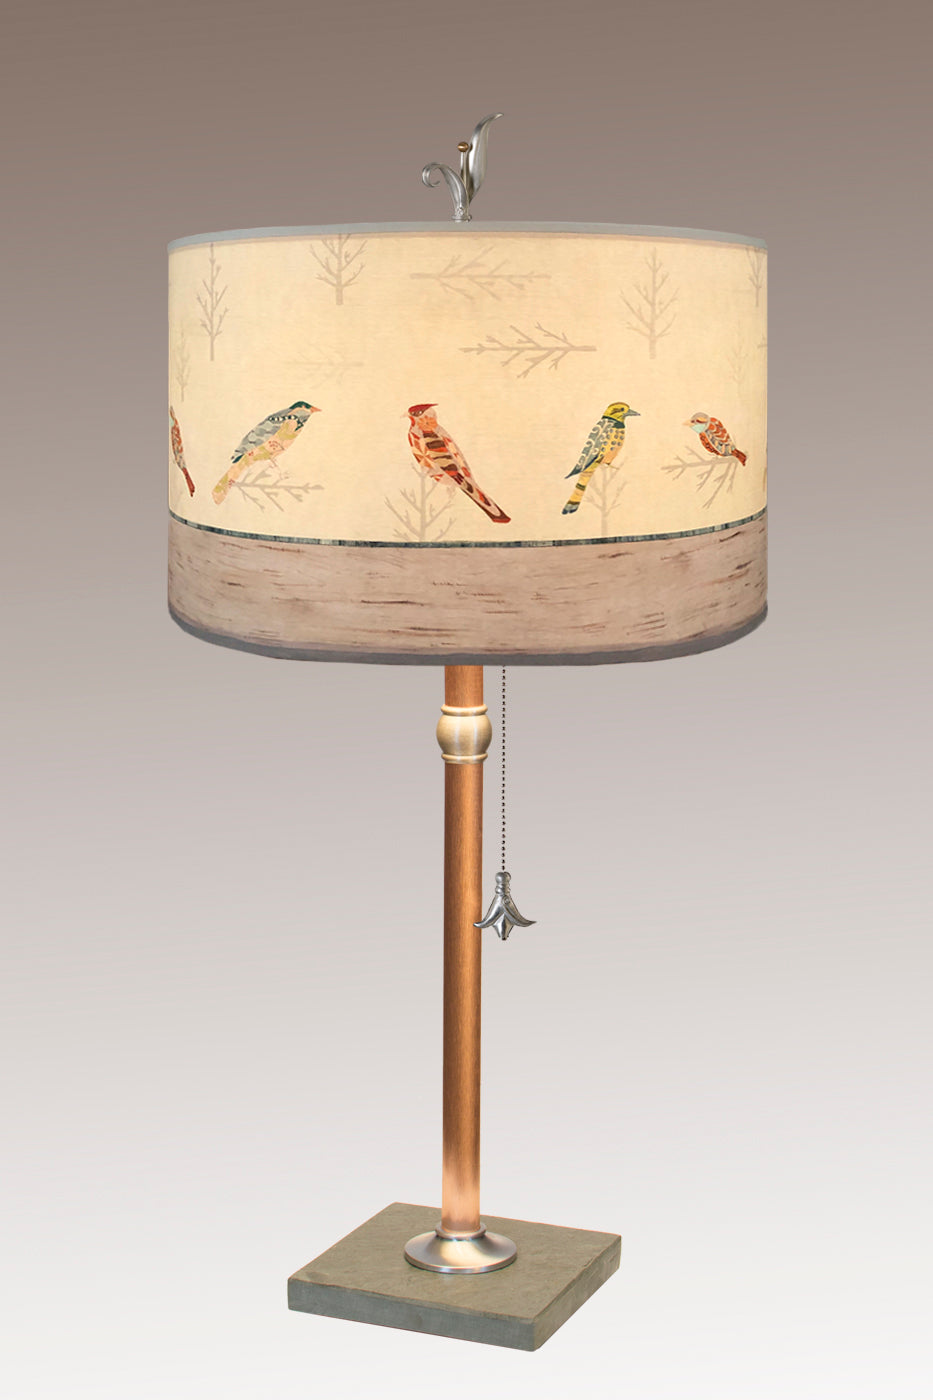 Janna Ugone & Co Table Lamps Copper Table Lamp with Large Drum Shade in Bird Friends